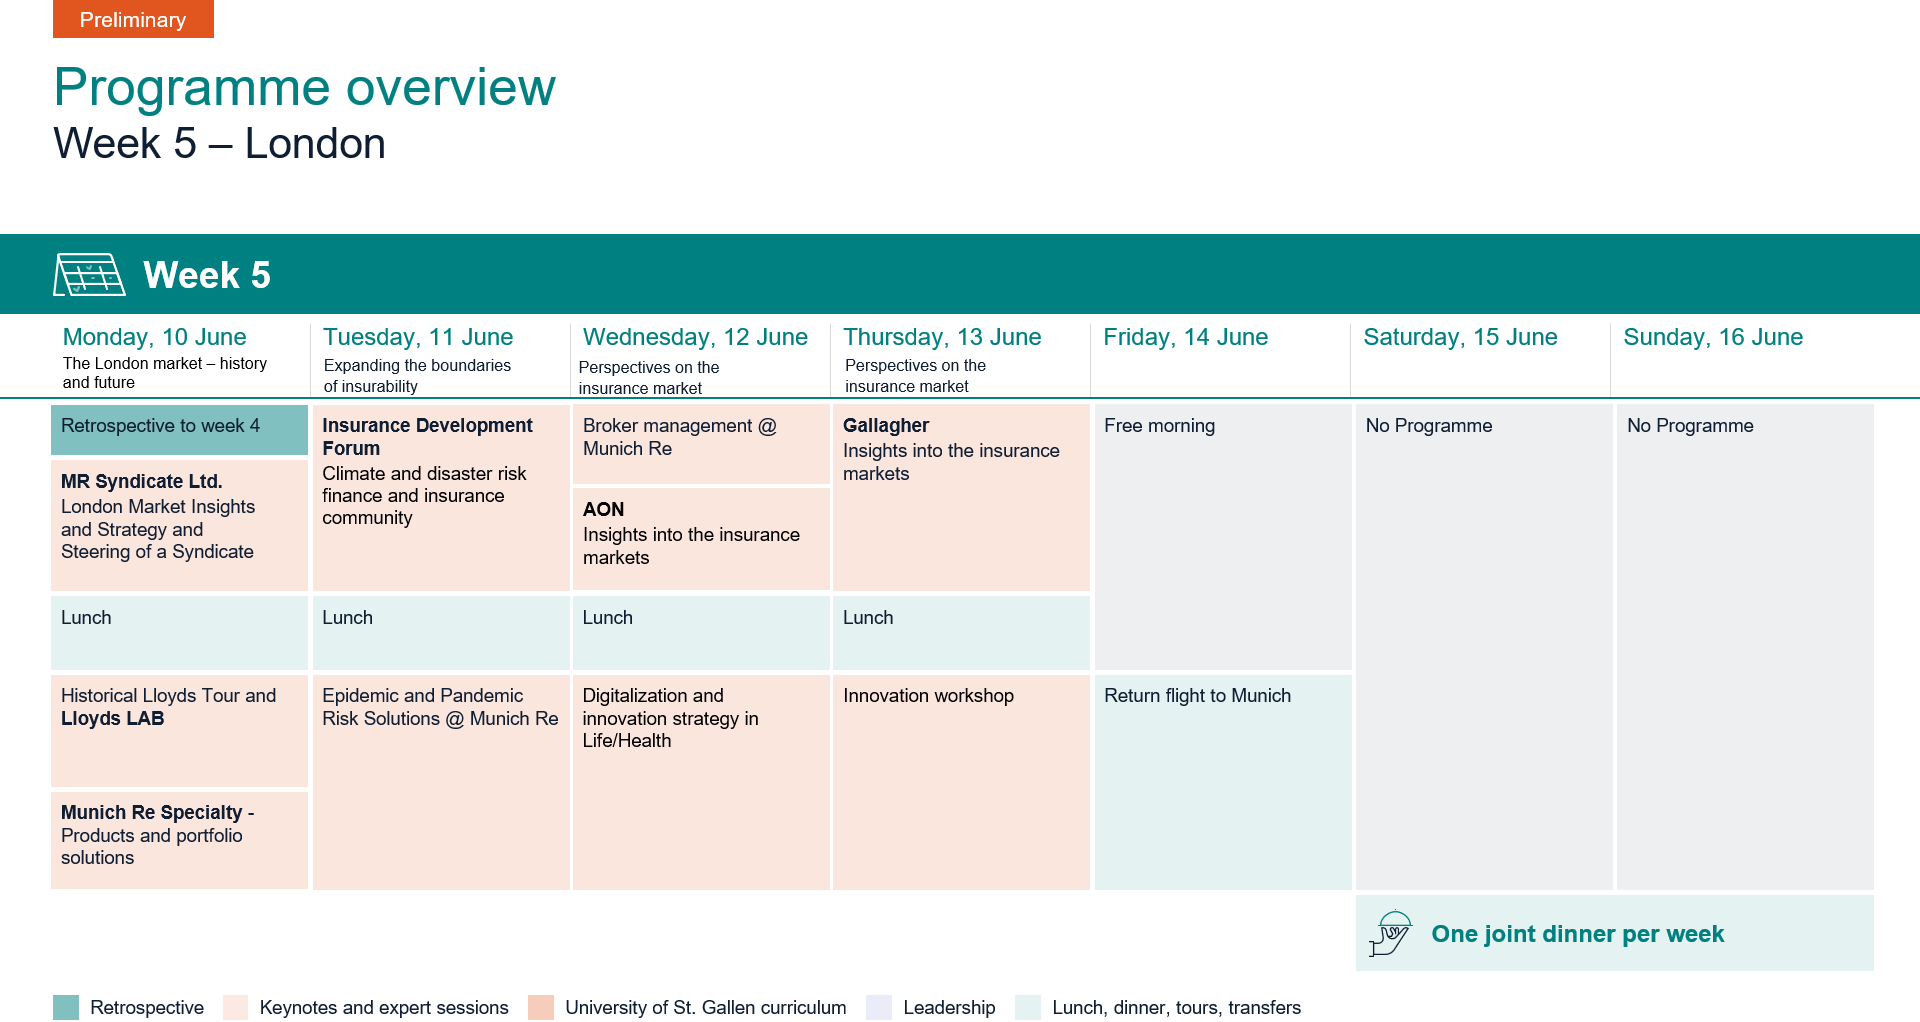 Programme overview – week 5